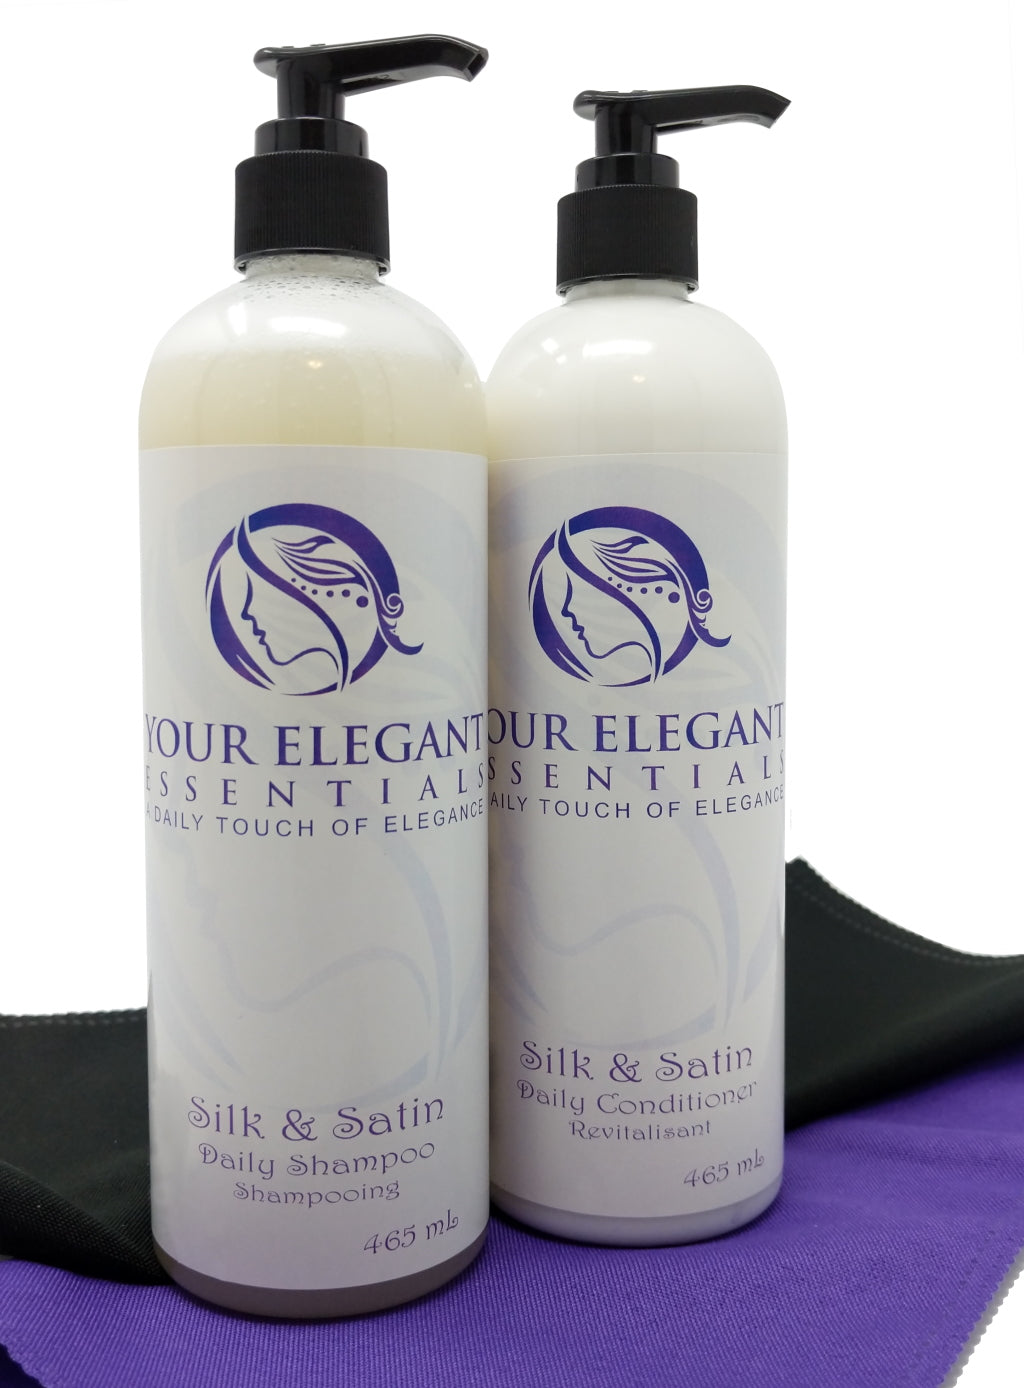 Our Silk & Satin Shampoo and Conditioner: A Client's Perspective